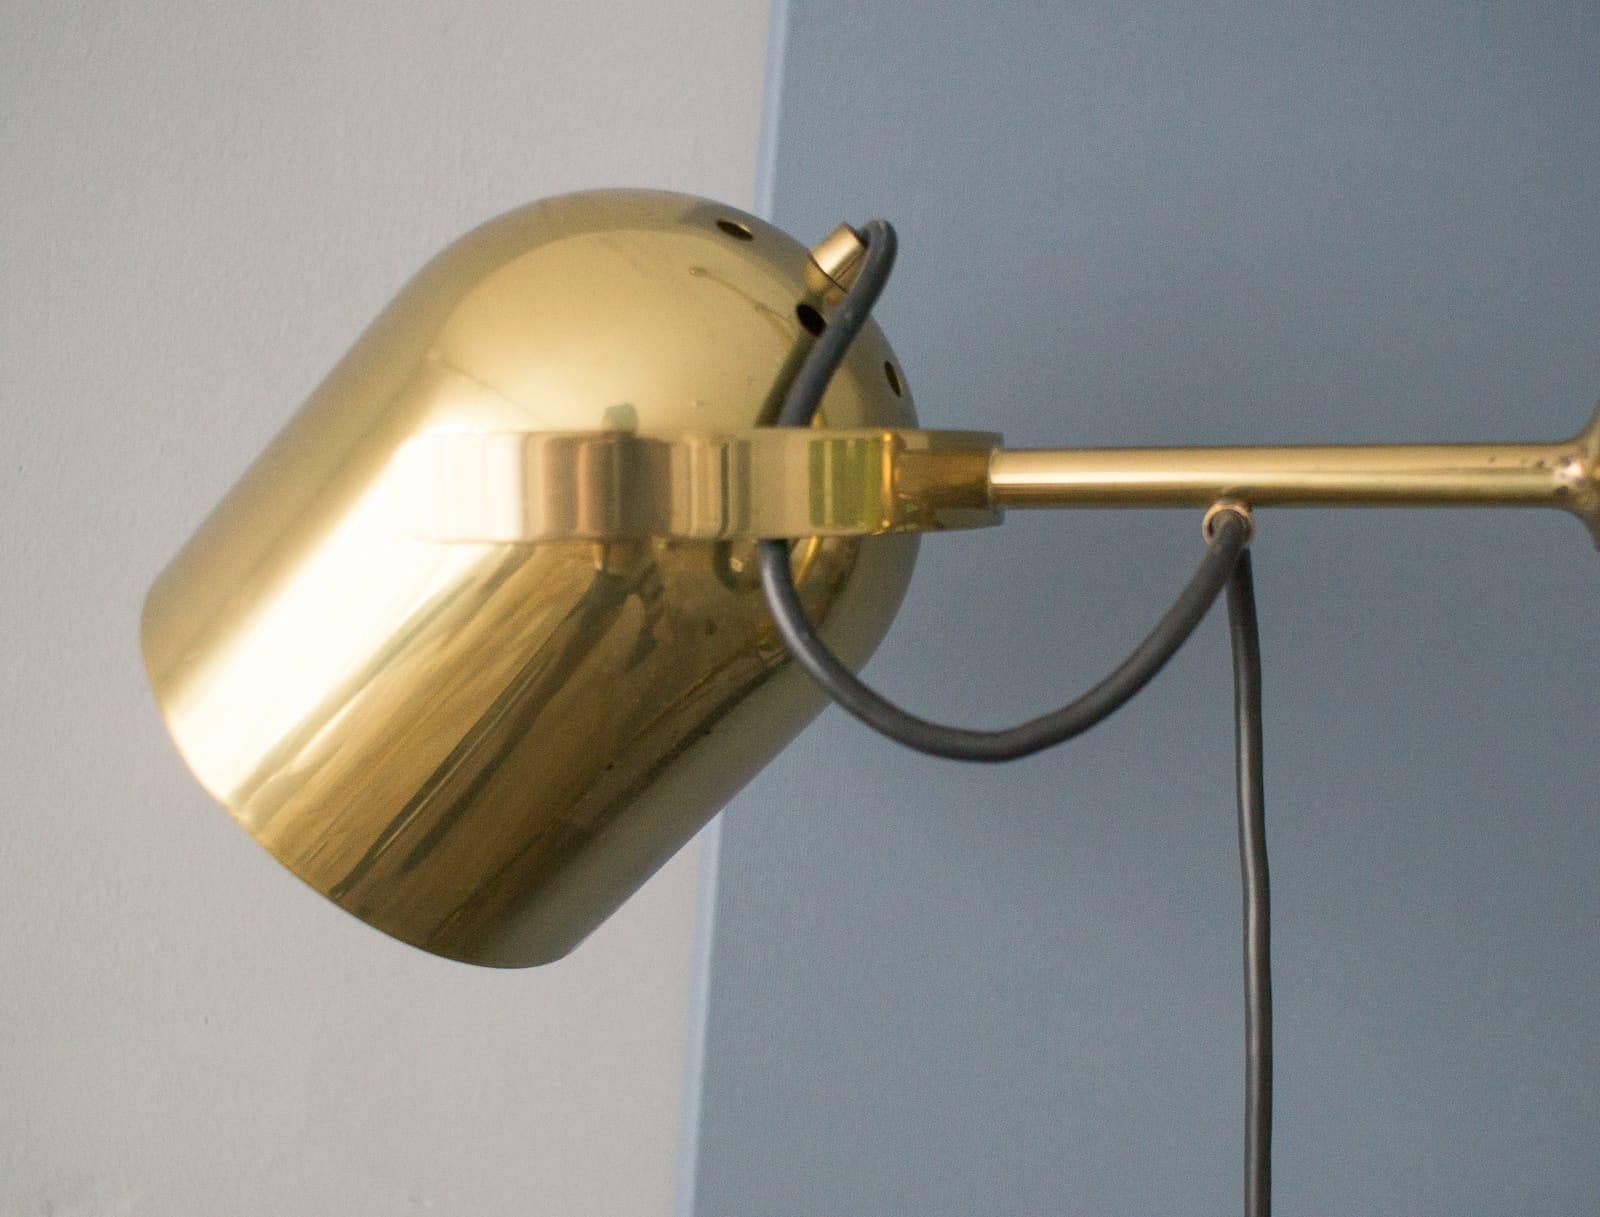 Extremly Rare Brass Tension Lamp from Florian Schulz, Model S 100 4